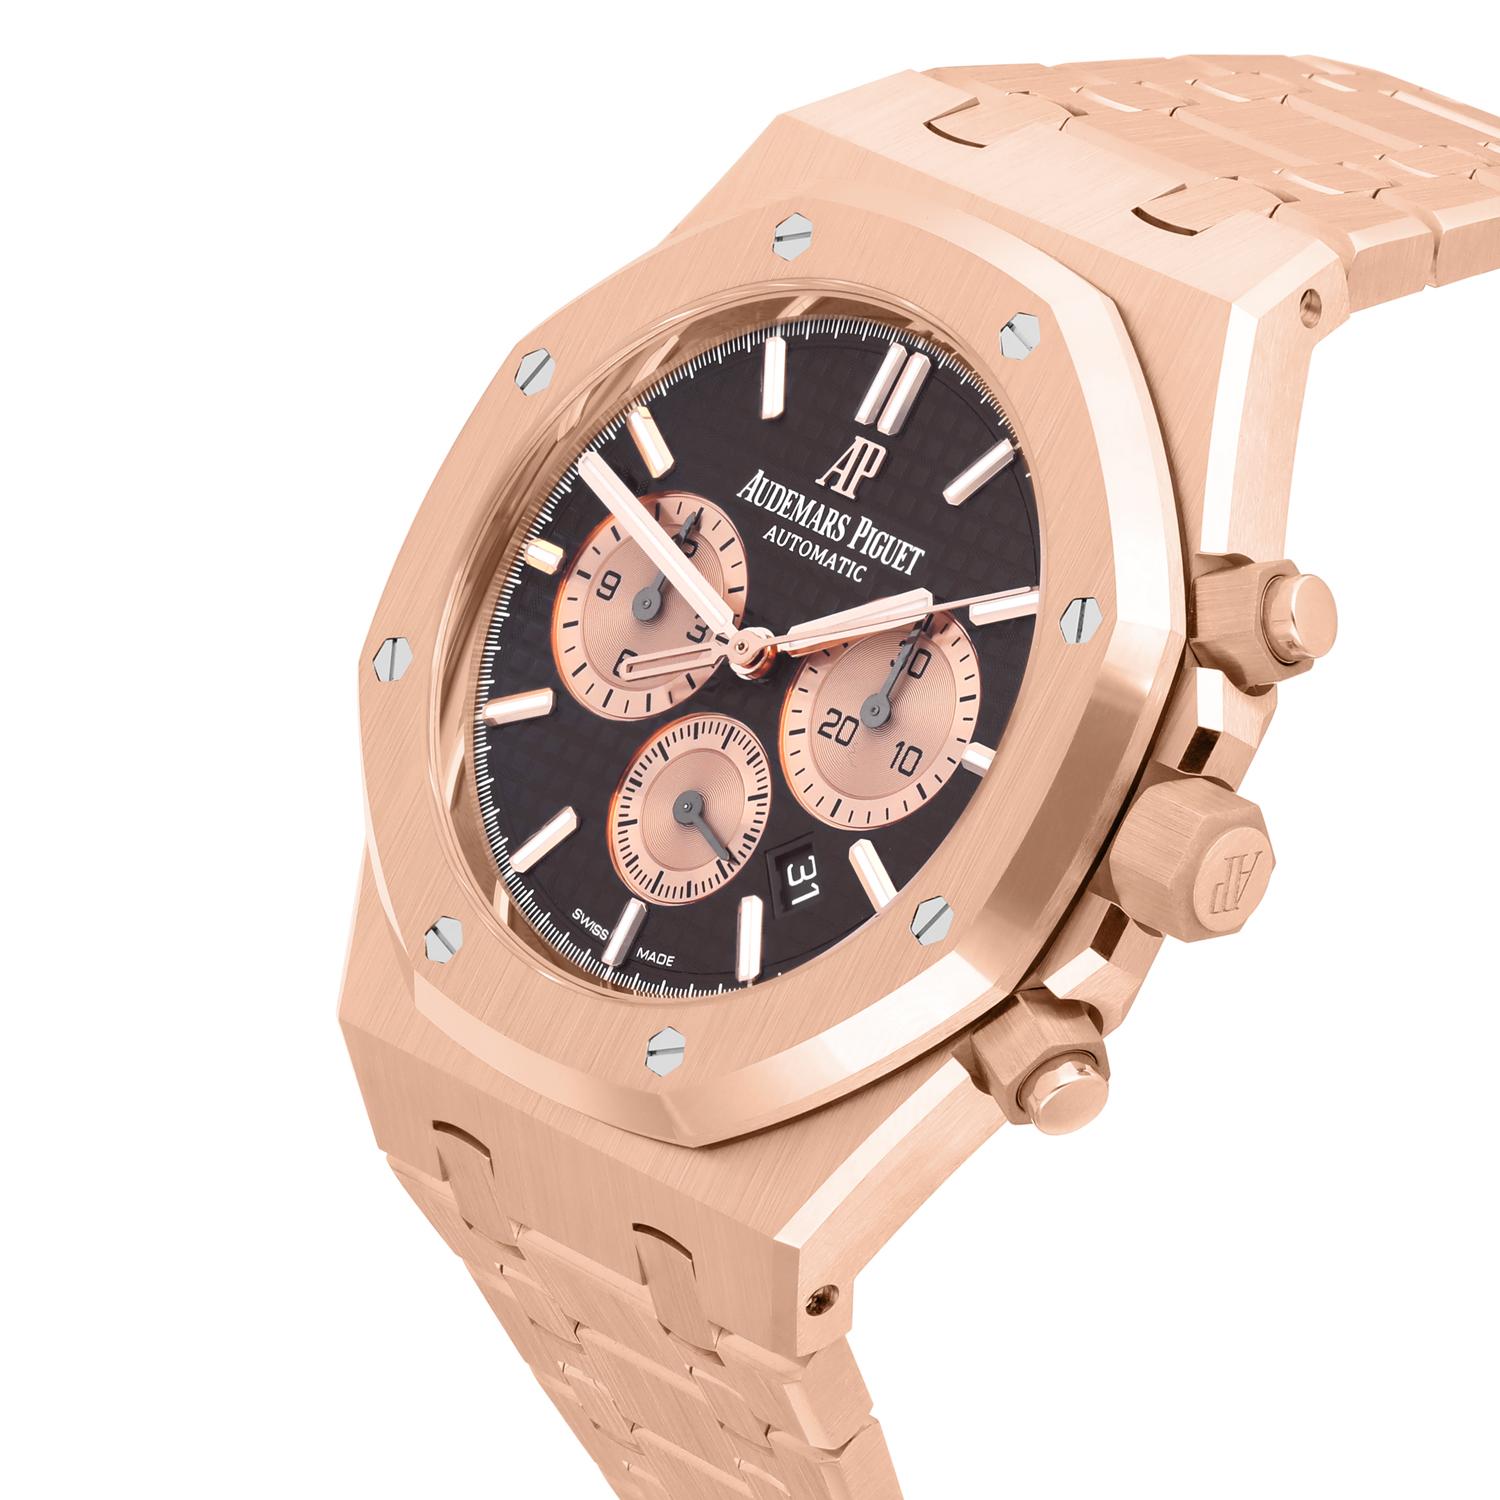 Modern Audemars Piguet Royal Oak Chronograph Chocolate 26331OR.OO.1220OR.02 NEW For Sale